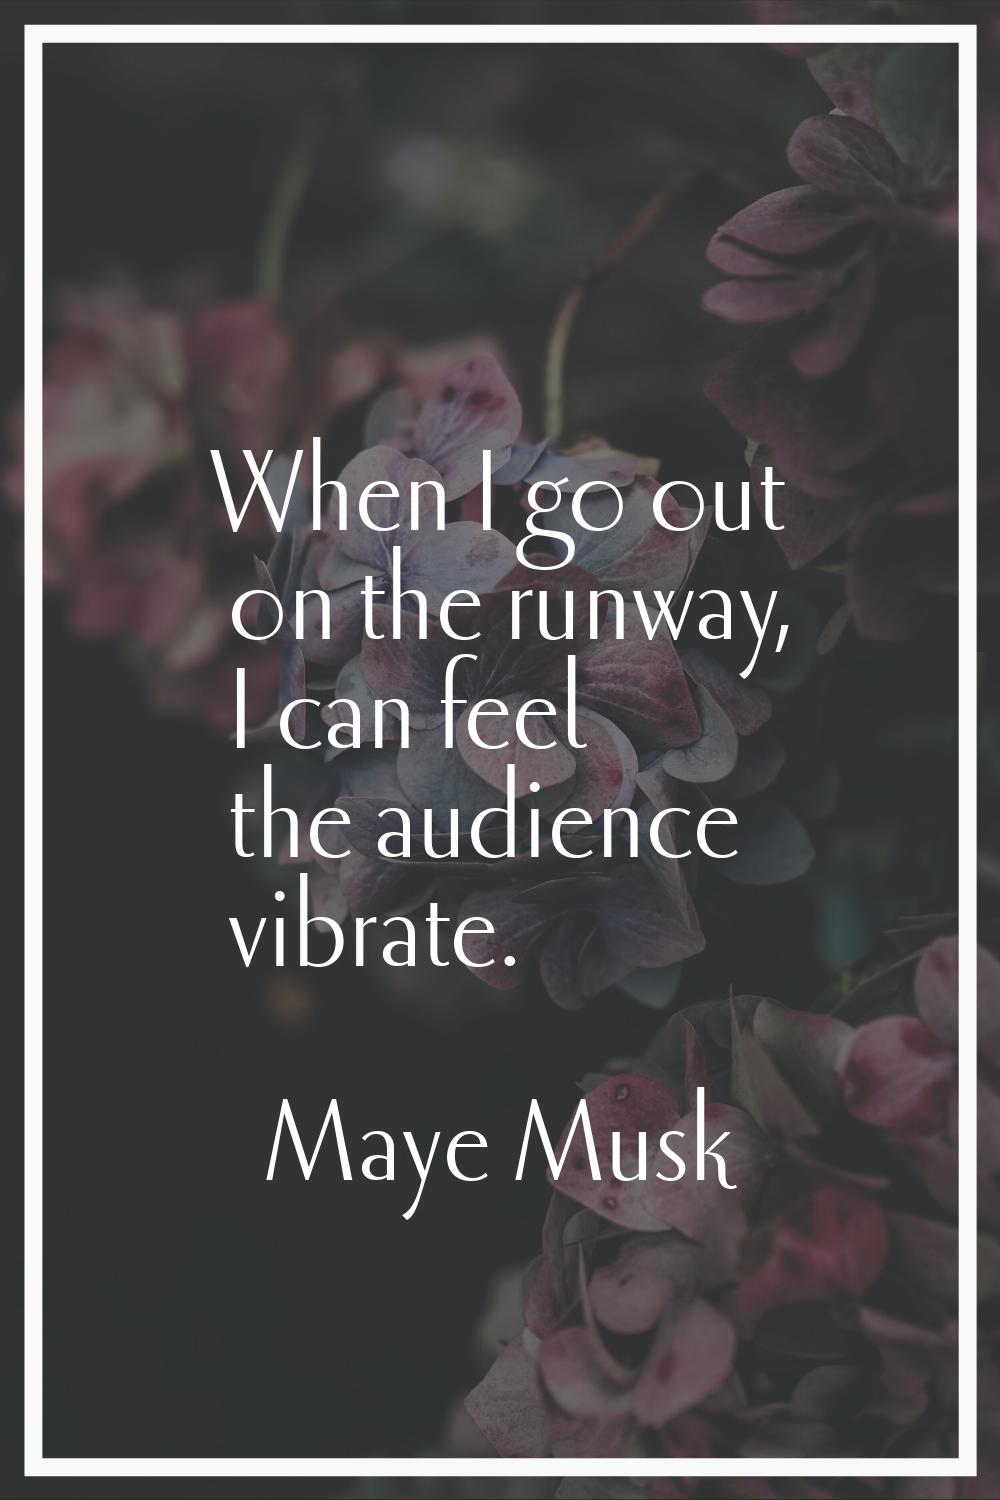 When I go out on the runway, I can feel the audience vibrate.